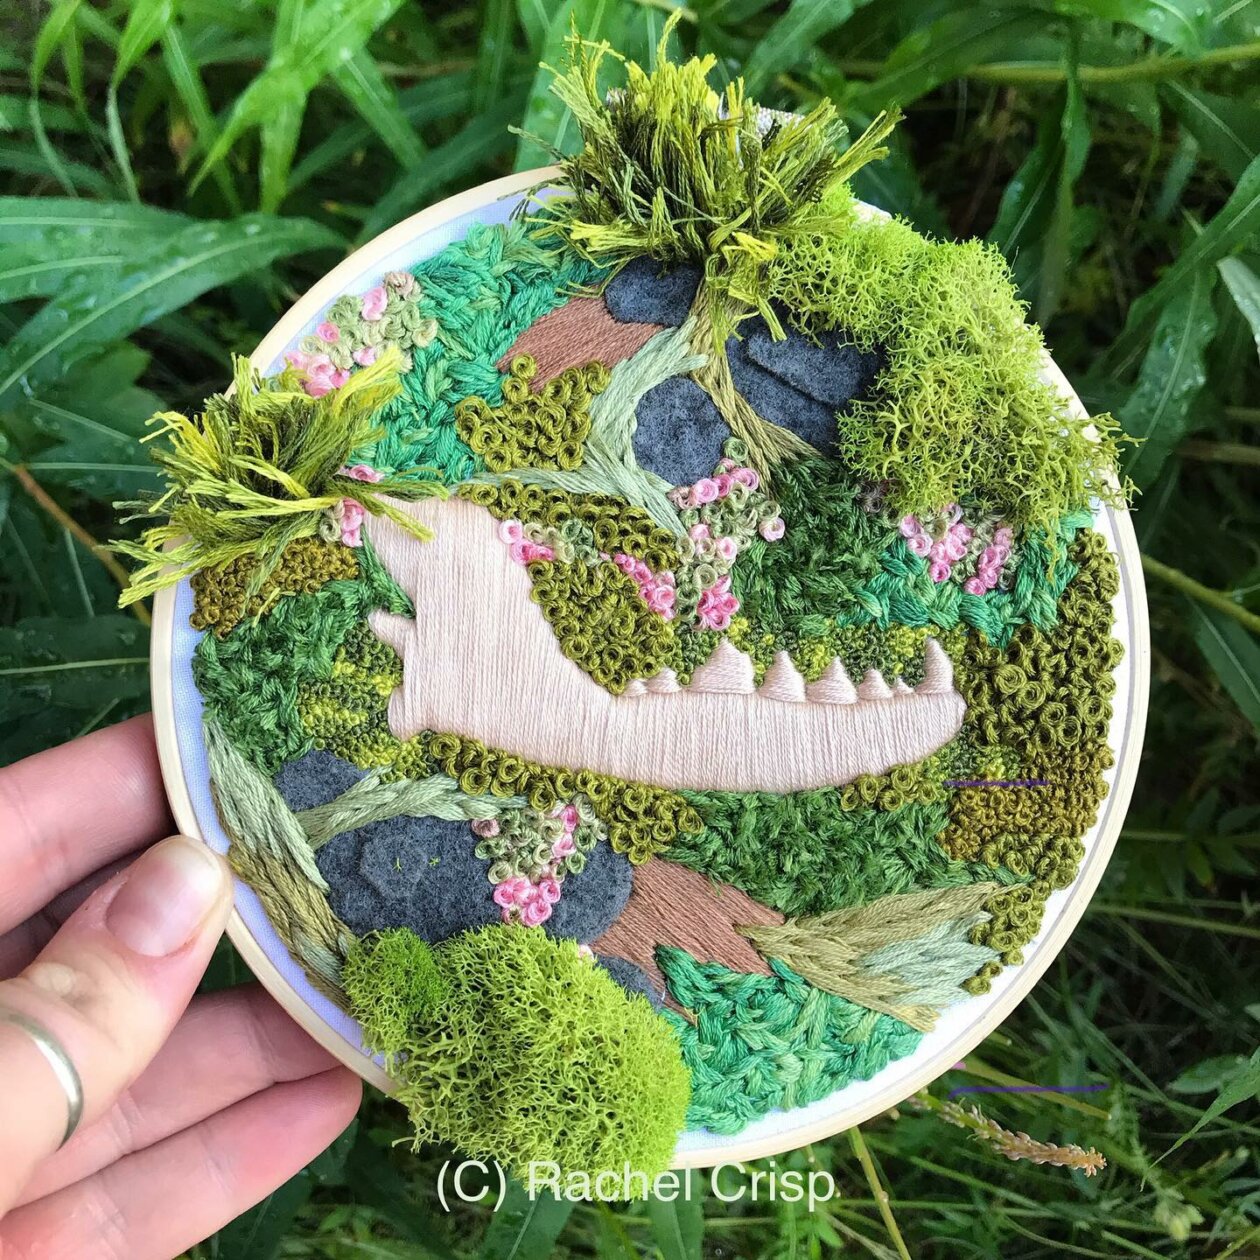 Embroidered Fossils, The Nature Inspired Embroidery Art Of Rachel Crisp (4)